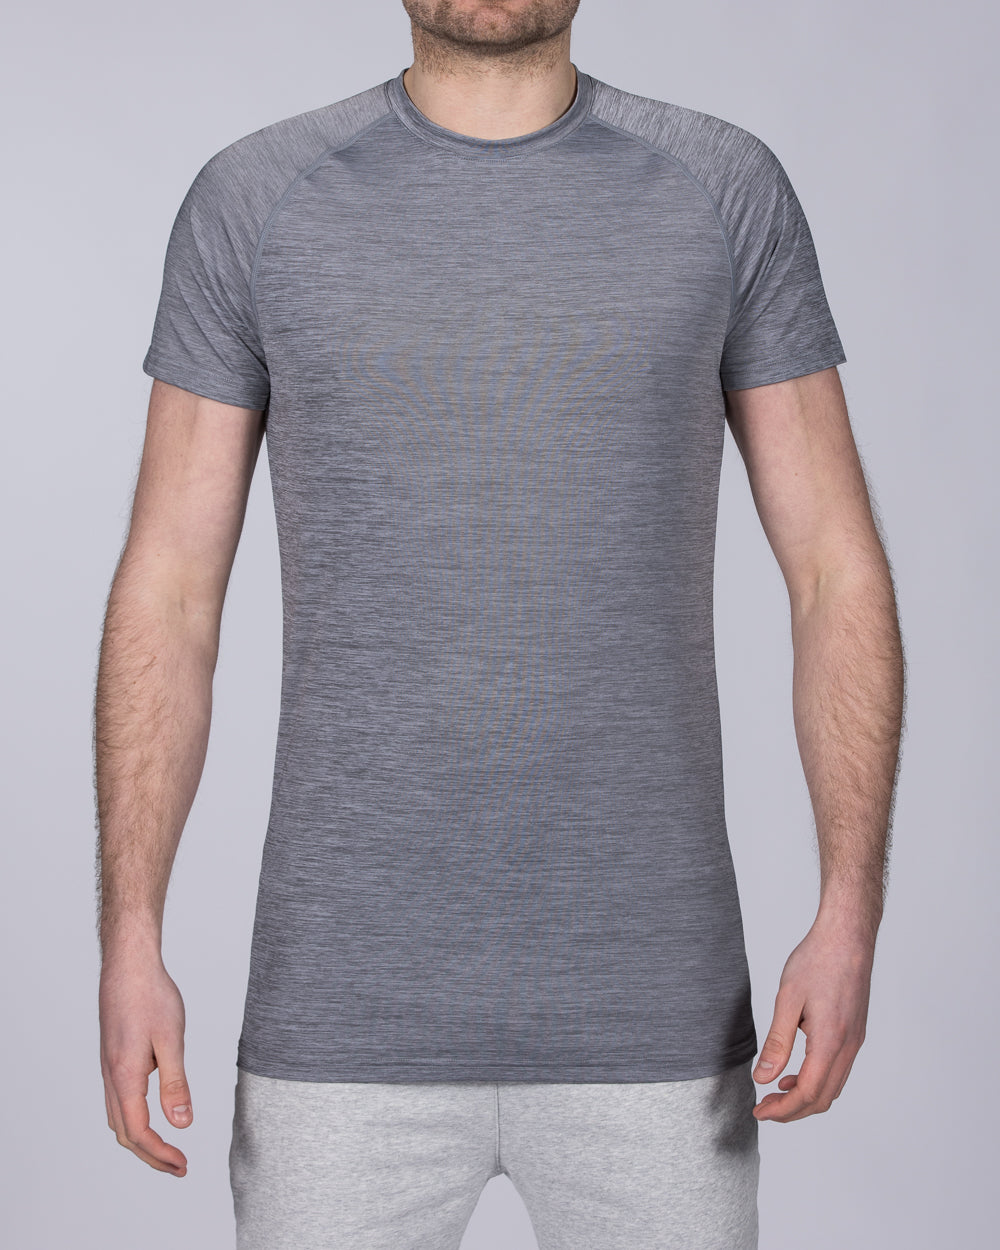 2t Tall Athletic Training Top (grey)